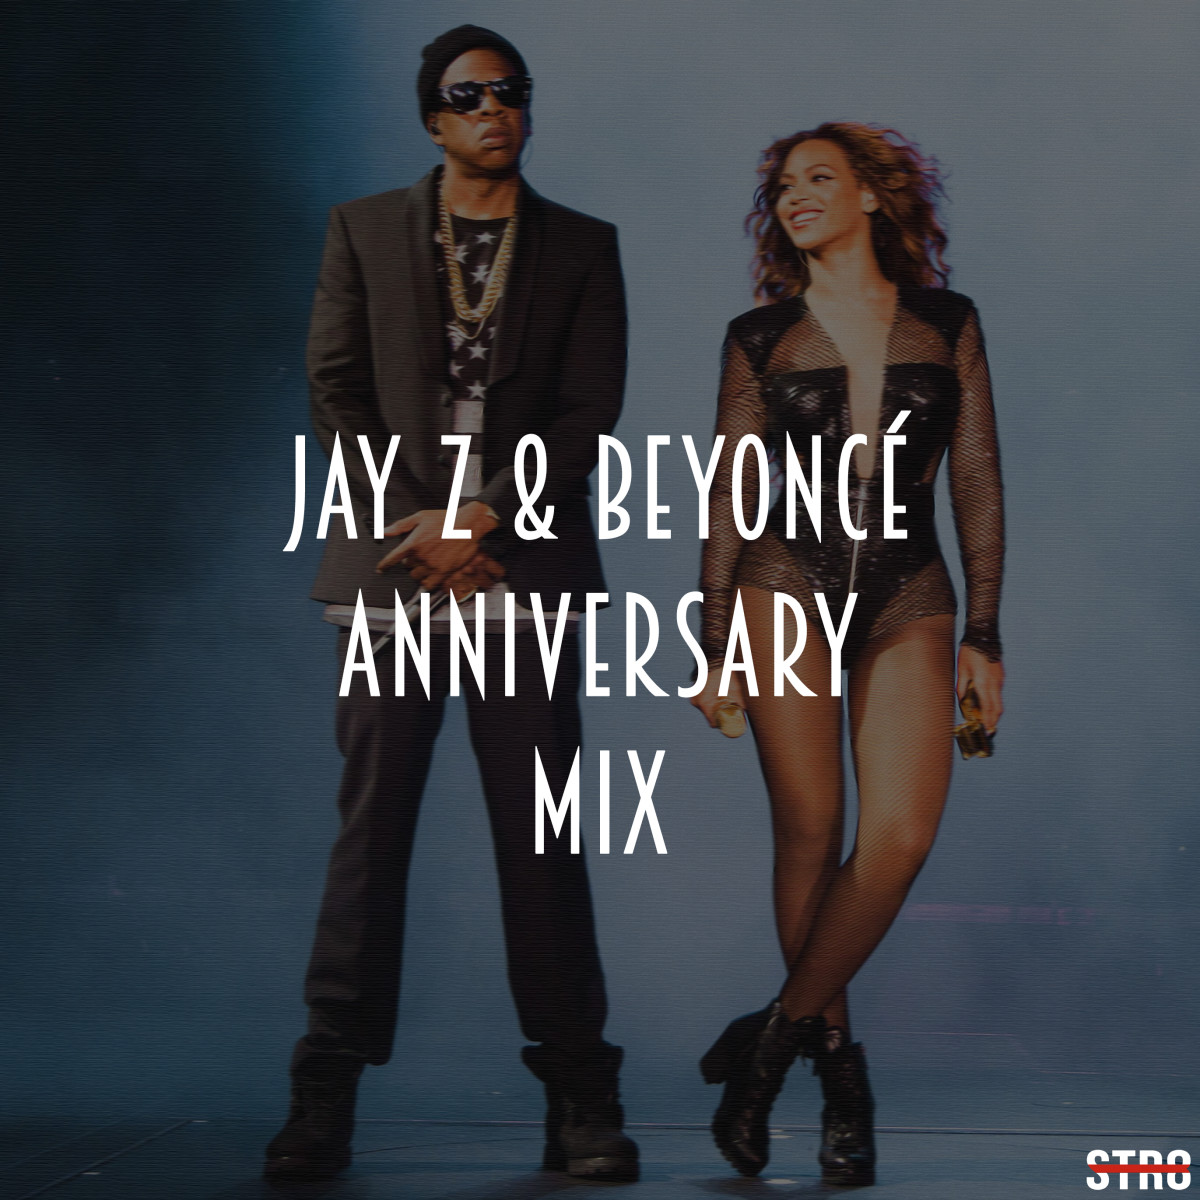 Beyonce and Jay Z anninversary